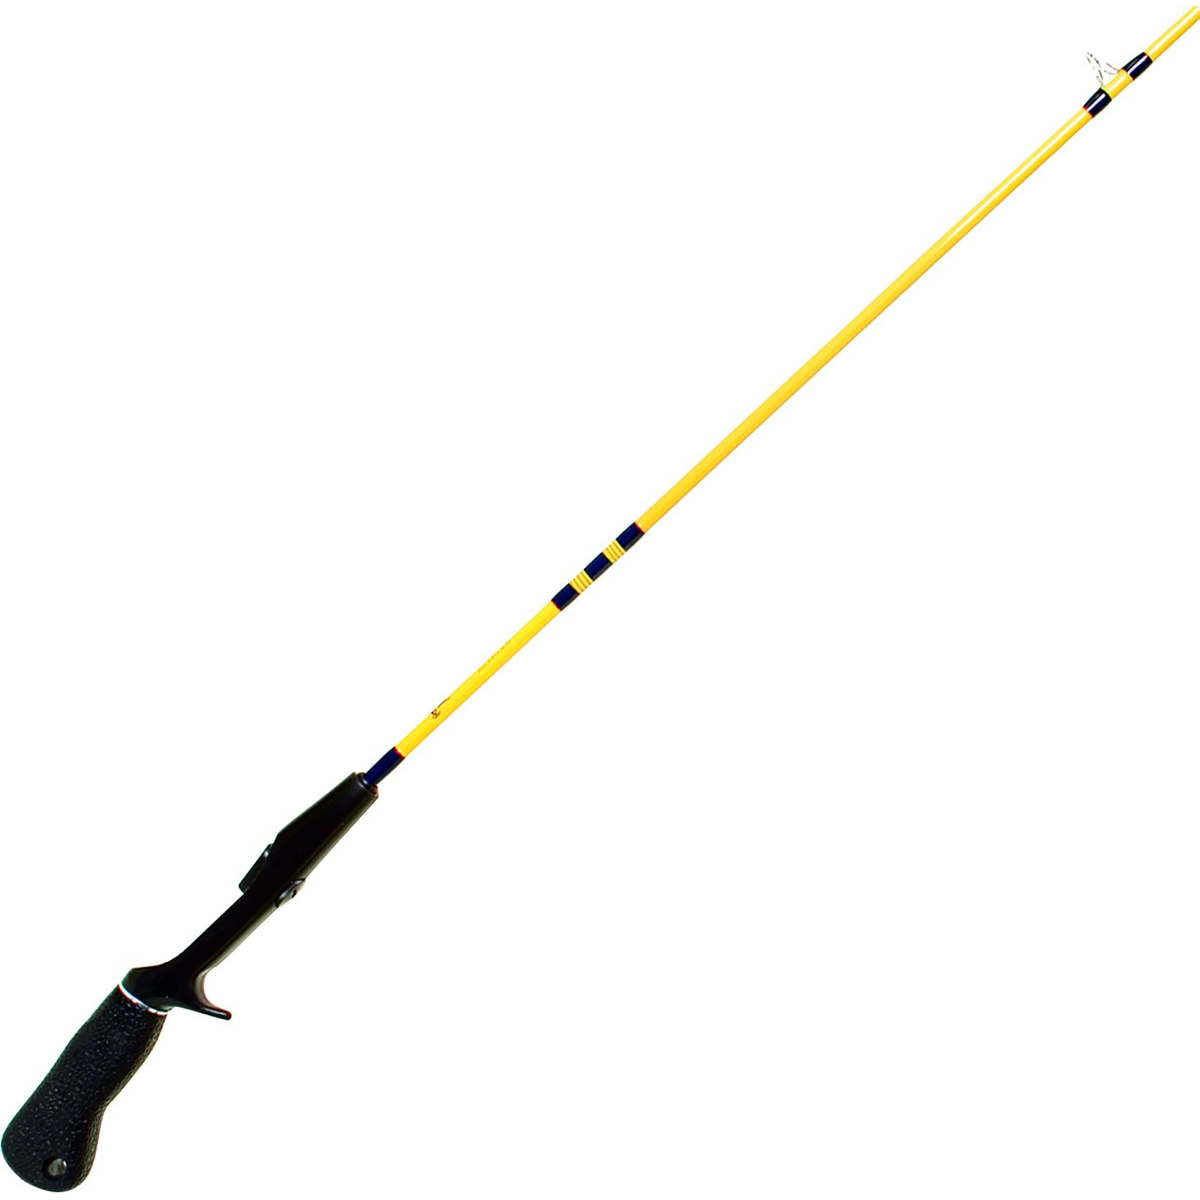 Photo of Eagle Claw Brave Eagle Solid Glass Spincast Rod for sale at United Tackle Shops.